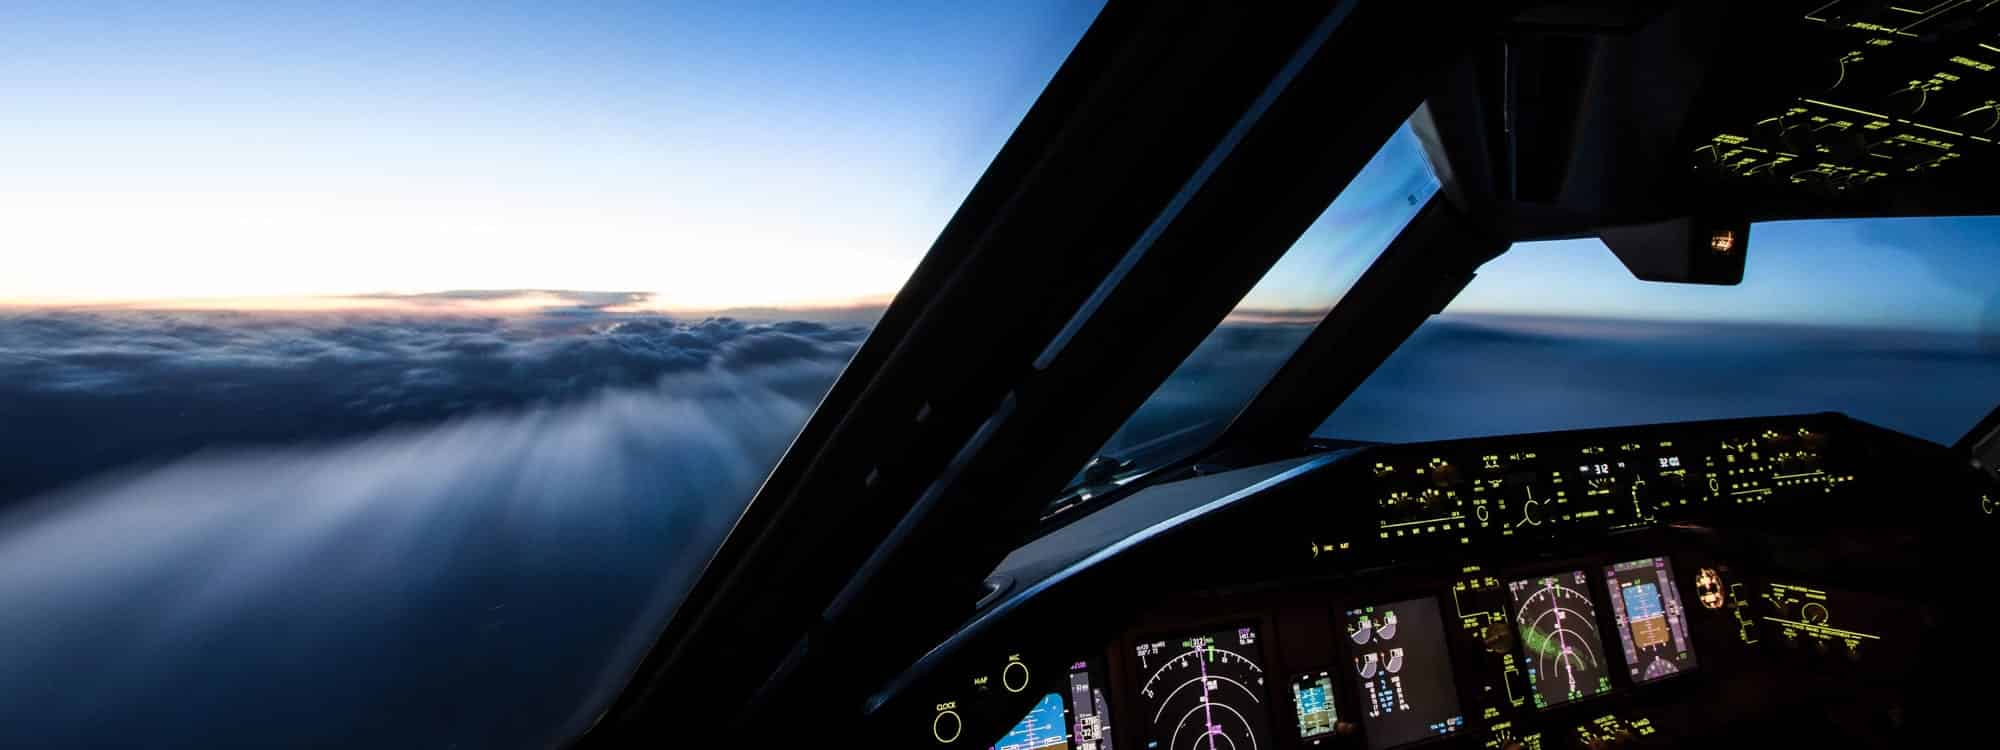 The view from the cockpit of the morning sky above the clouds highlights the importance of attending the Introduction to ISO 9001:2015 Quality Management Systems course.